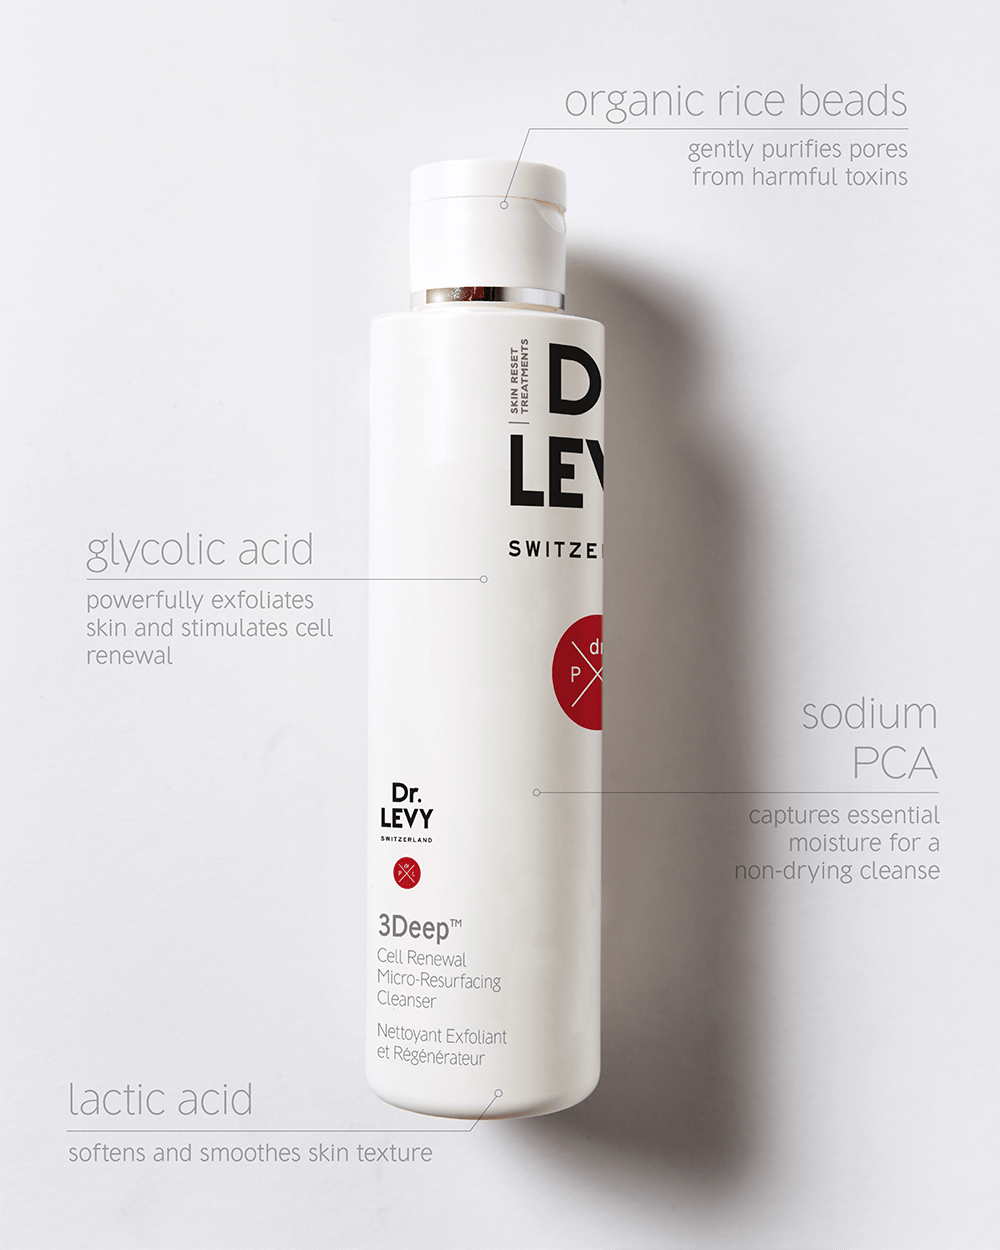 dr-levy-switzerland-skin-care-beauty-product-3deep-cleanser-skin-benefits.png